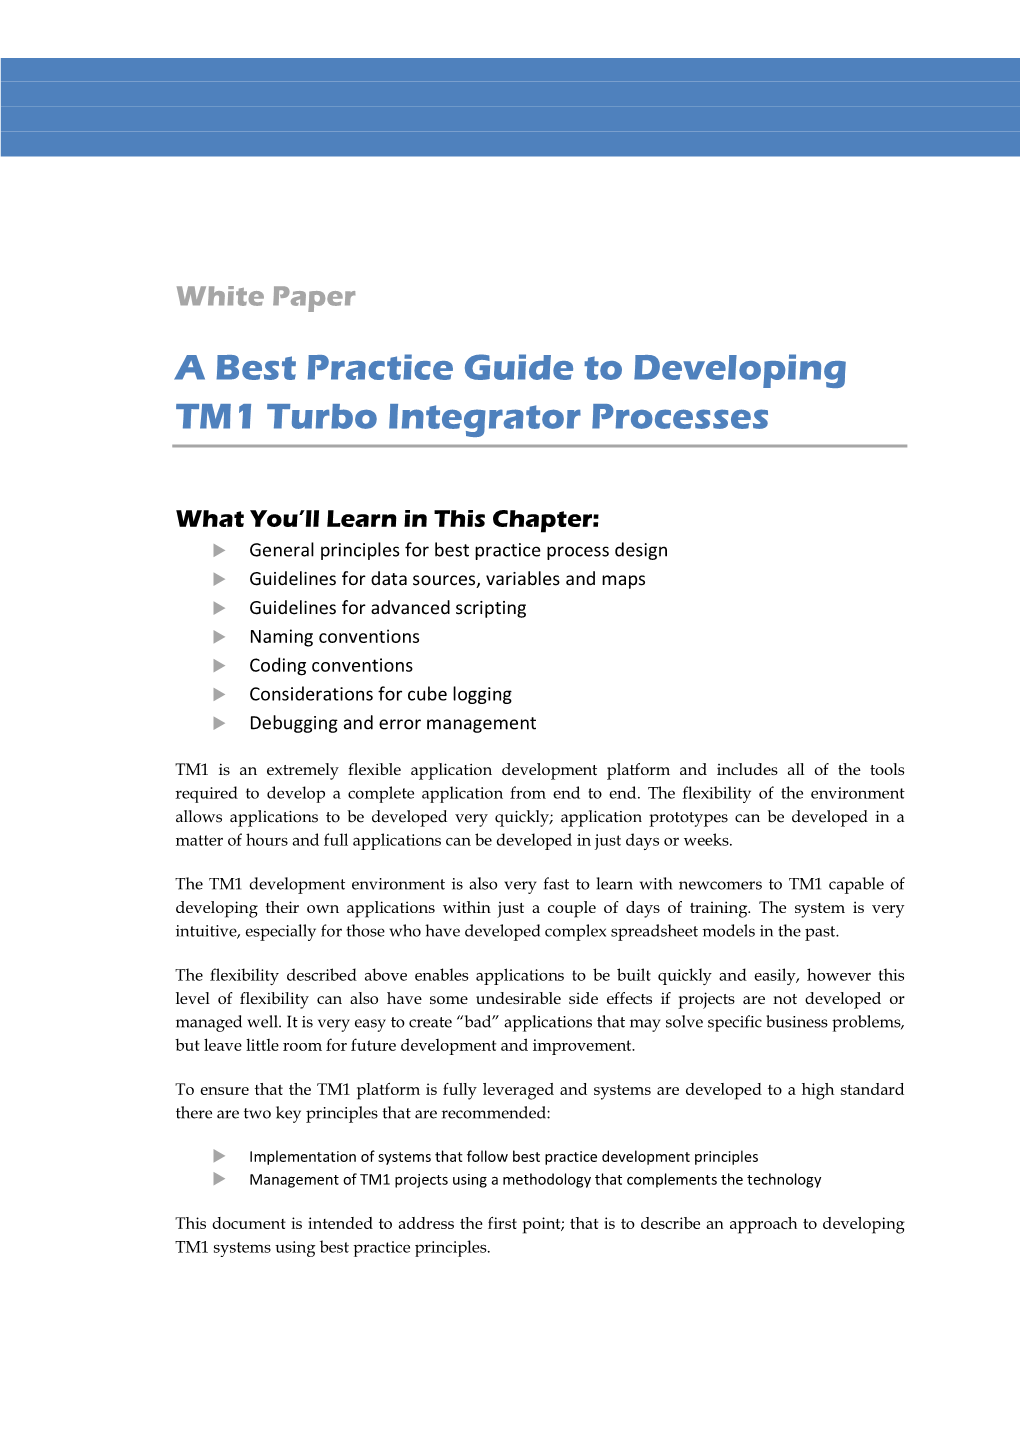 A Best Practice Guide to Developing TM1 Turbo Integrator Processes